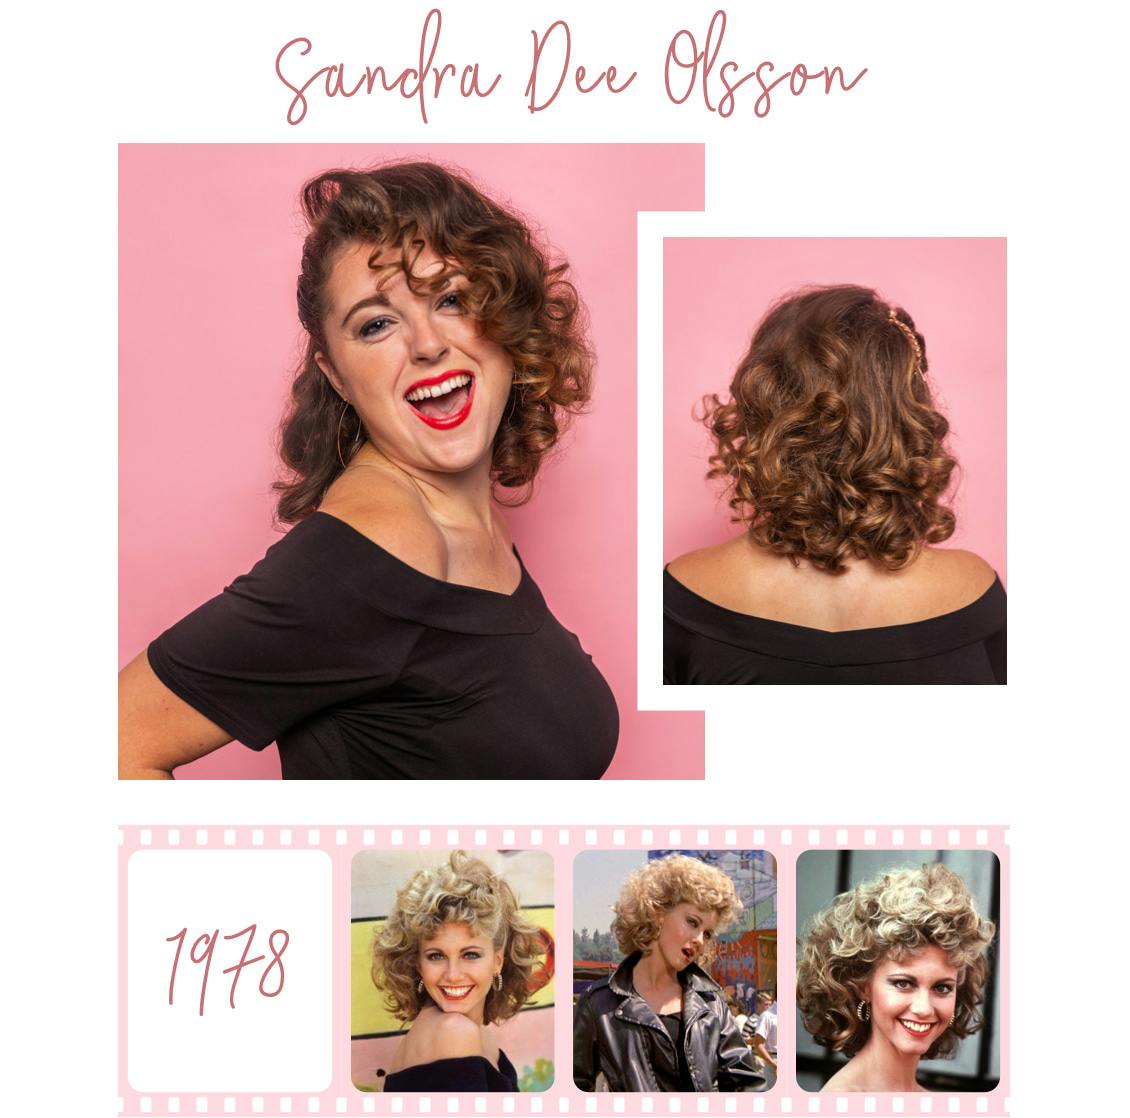 Image of esalon employee dressed as sandra dee with light brunette hair color and original image of actress below from 1978 film grease